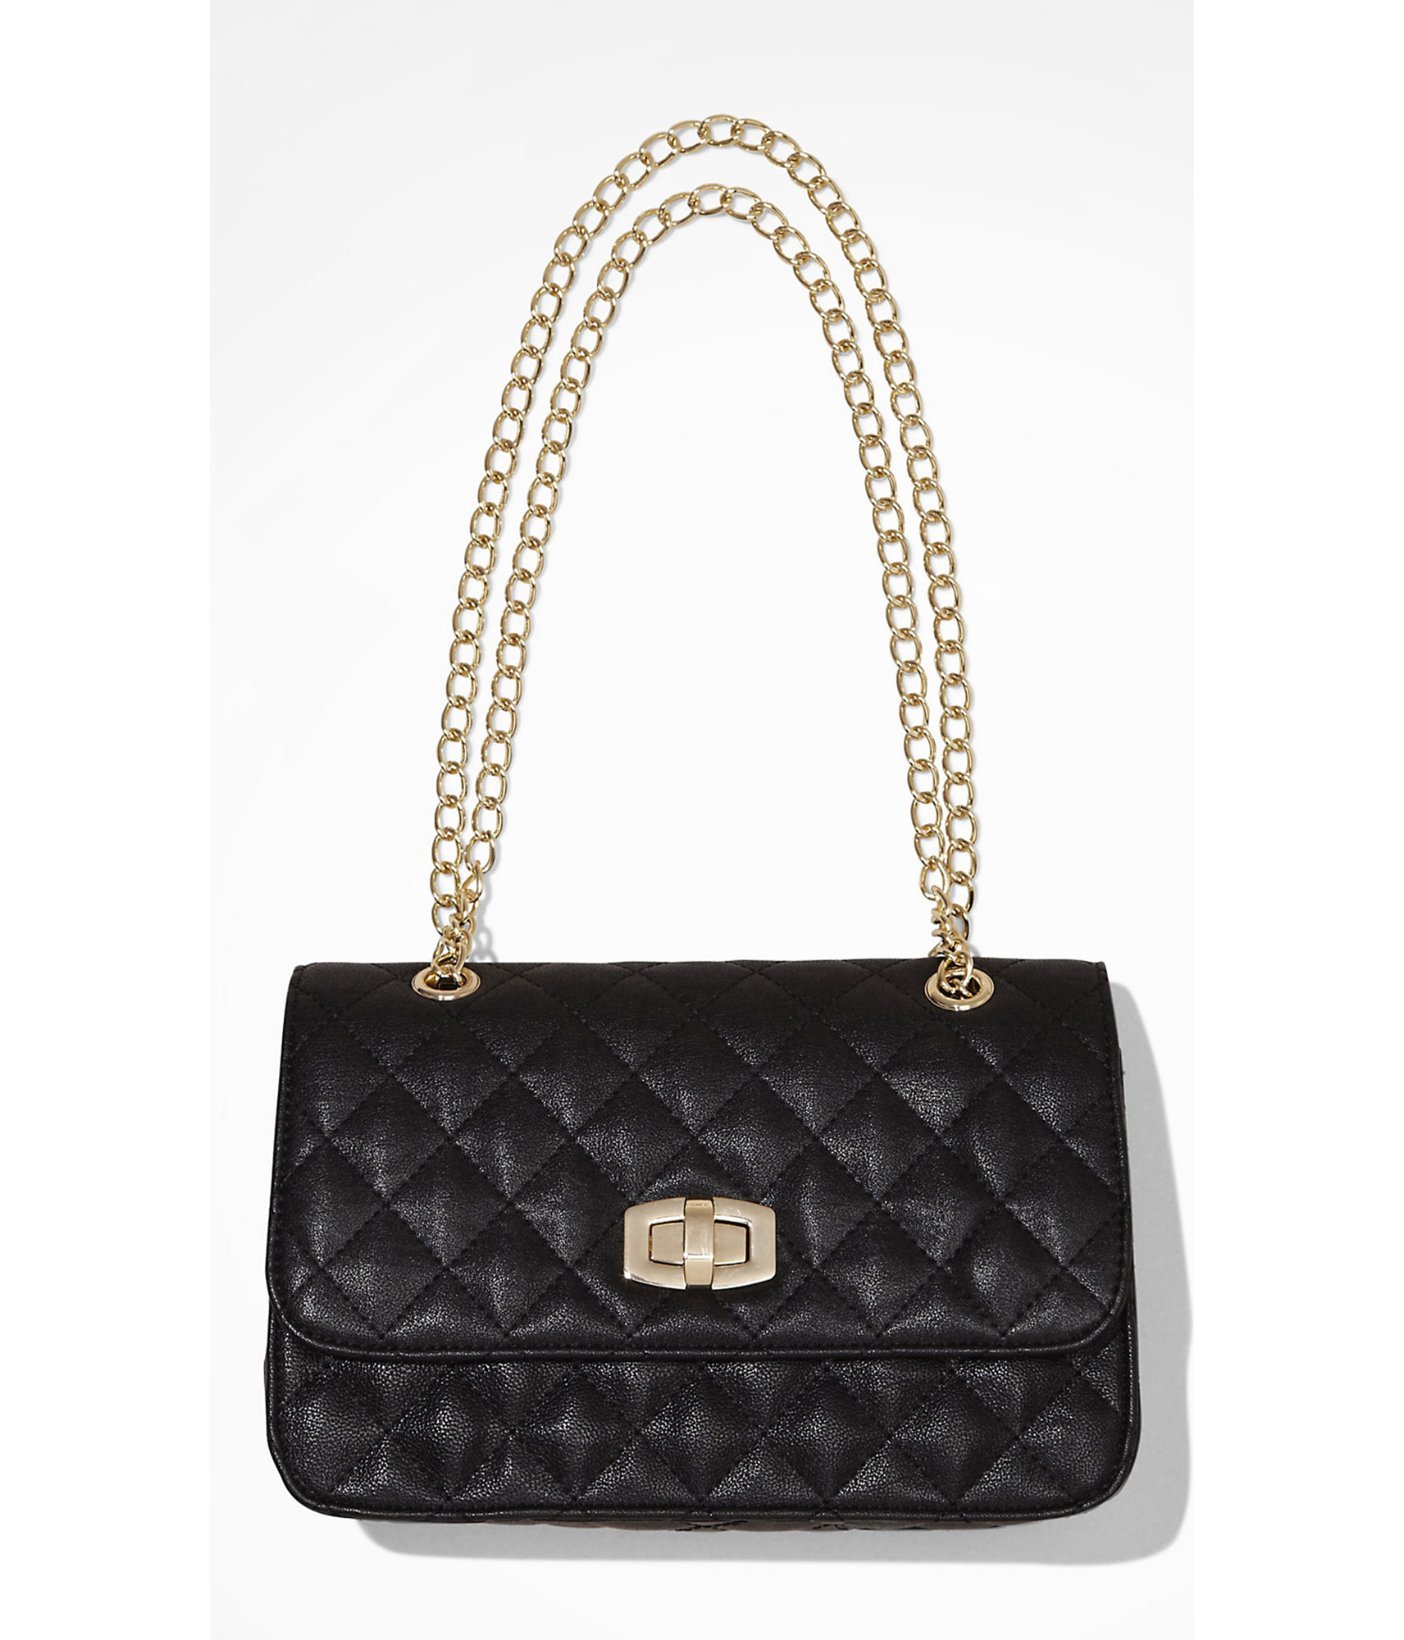 Express Quilted Chain Strap Shoulder Bag in Black - Lyst